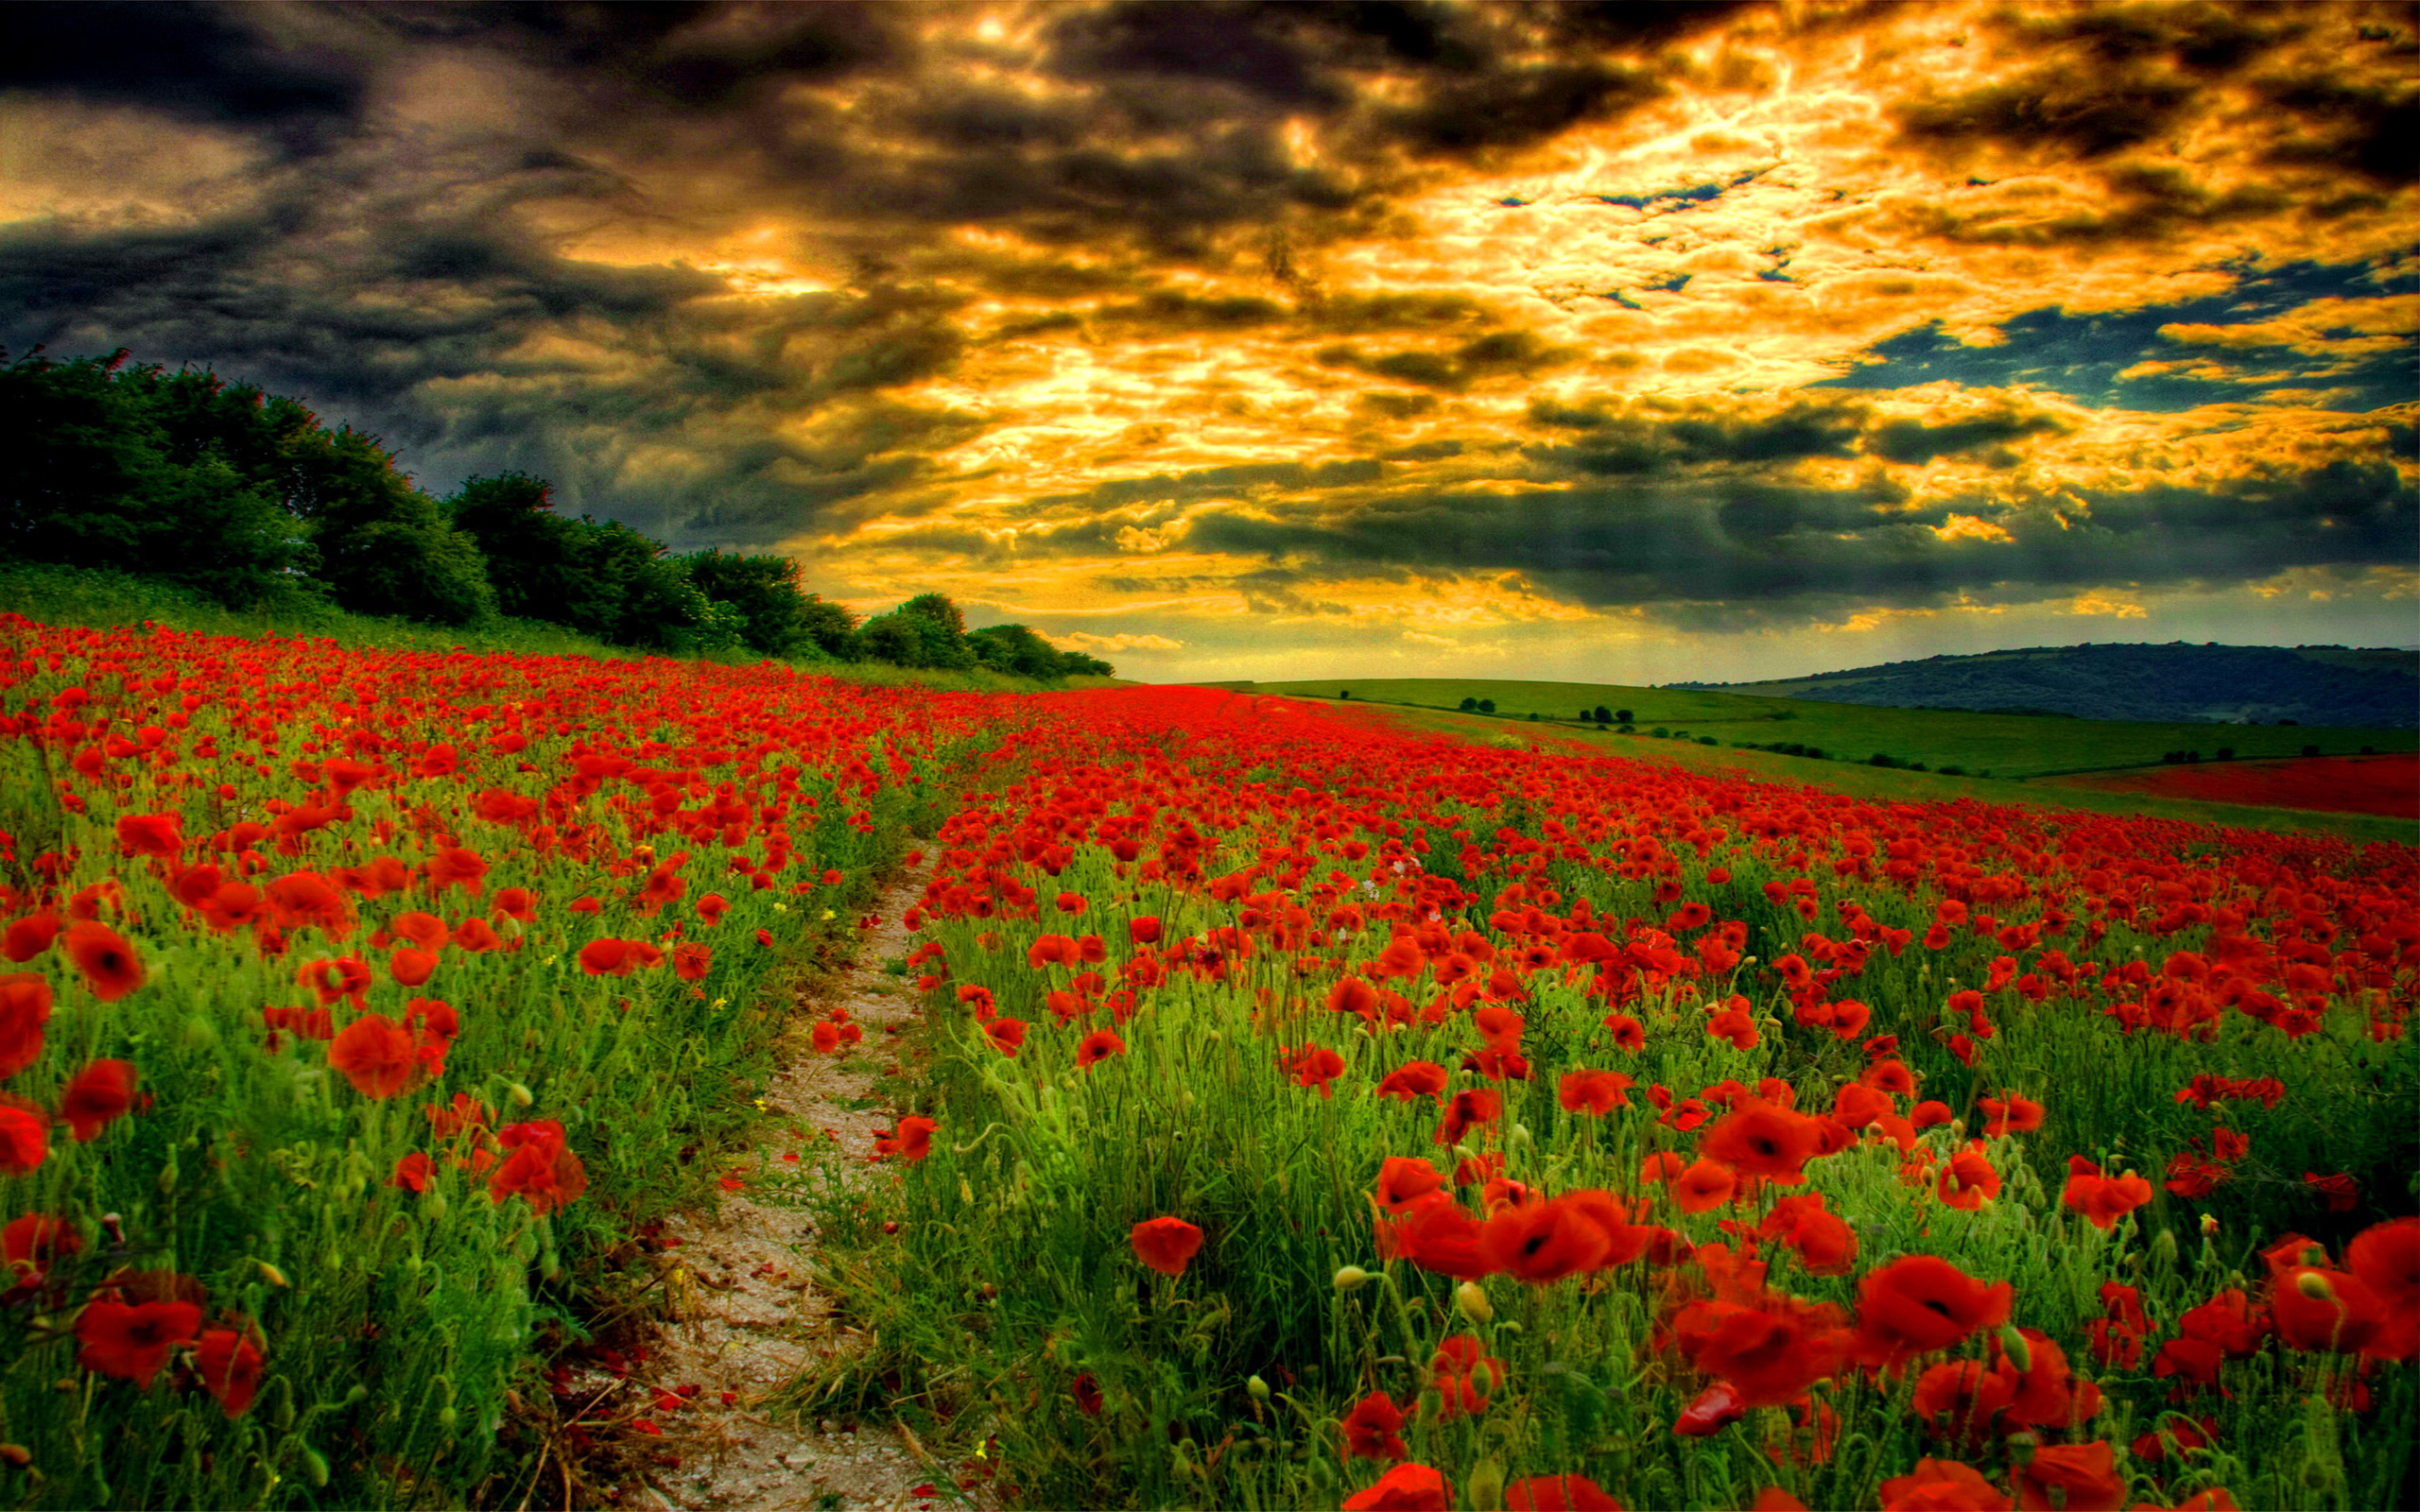 Sunset Clouds over Poppy Field HD Wallpaper. Background Image